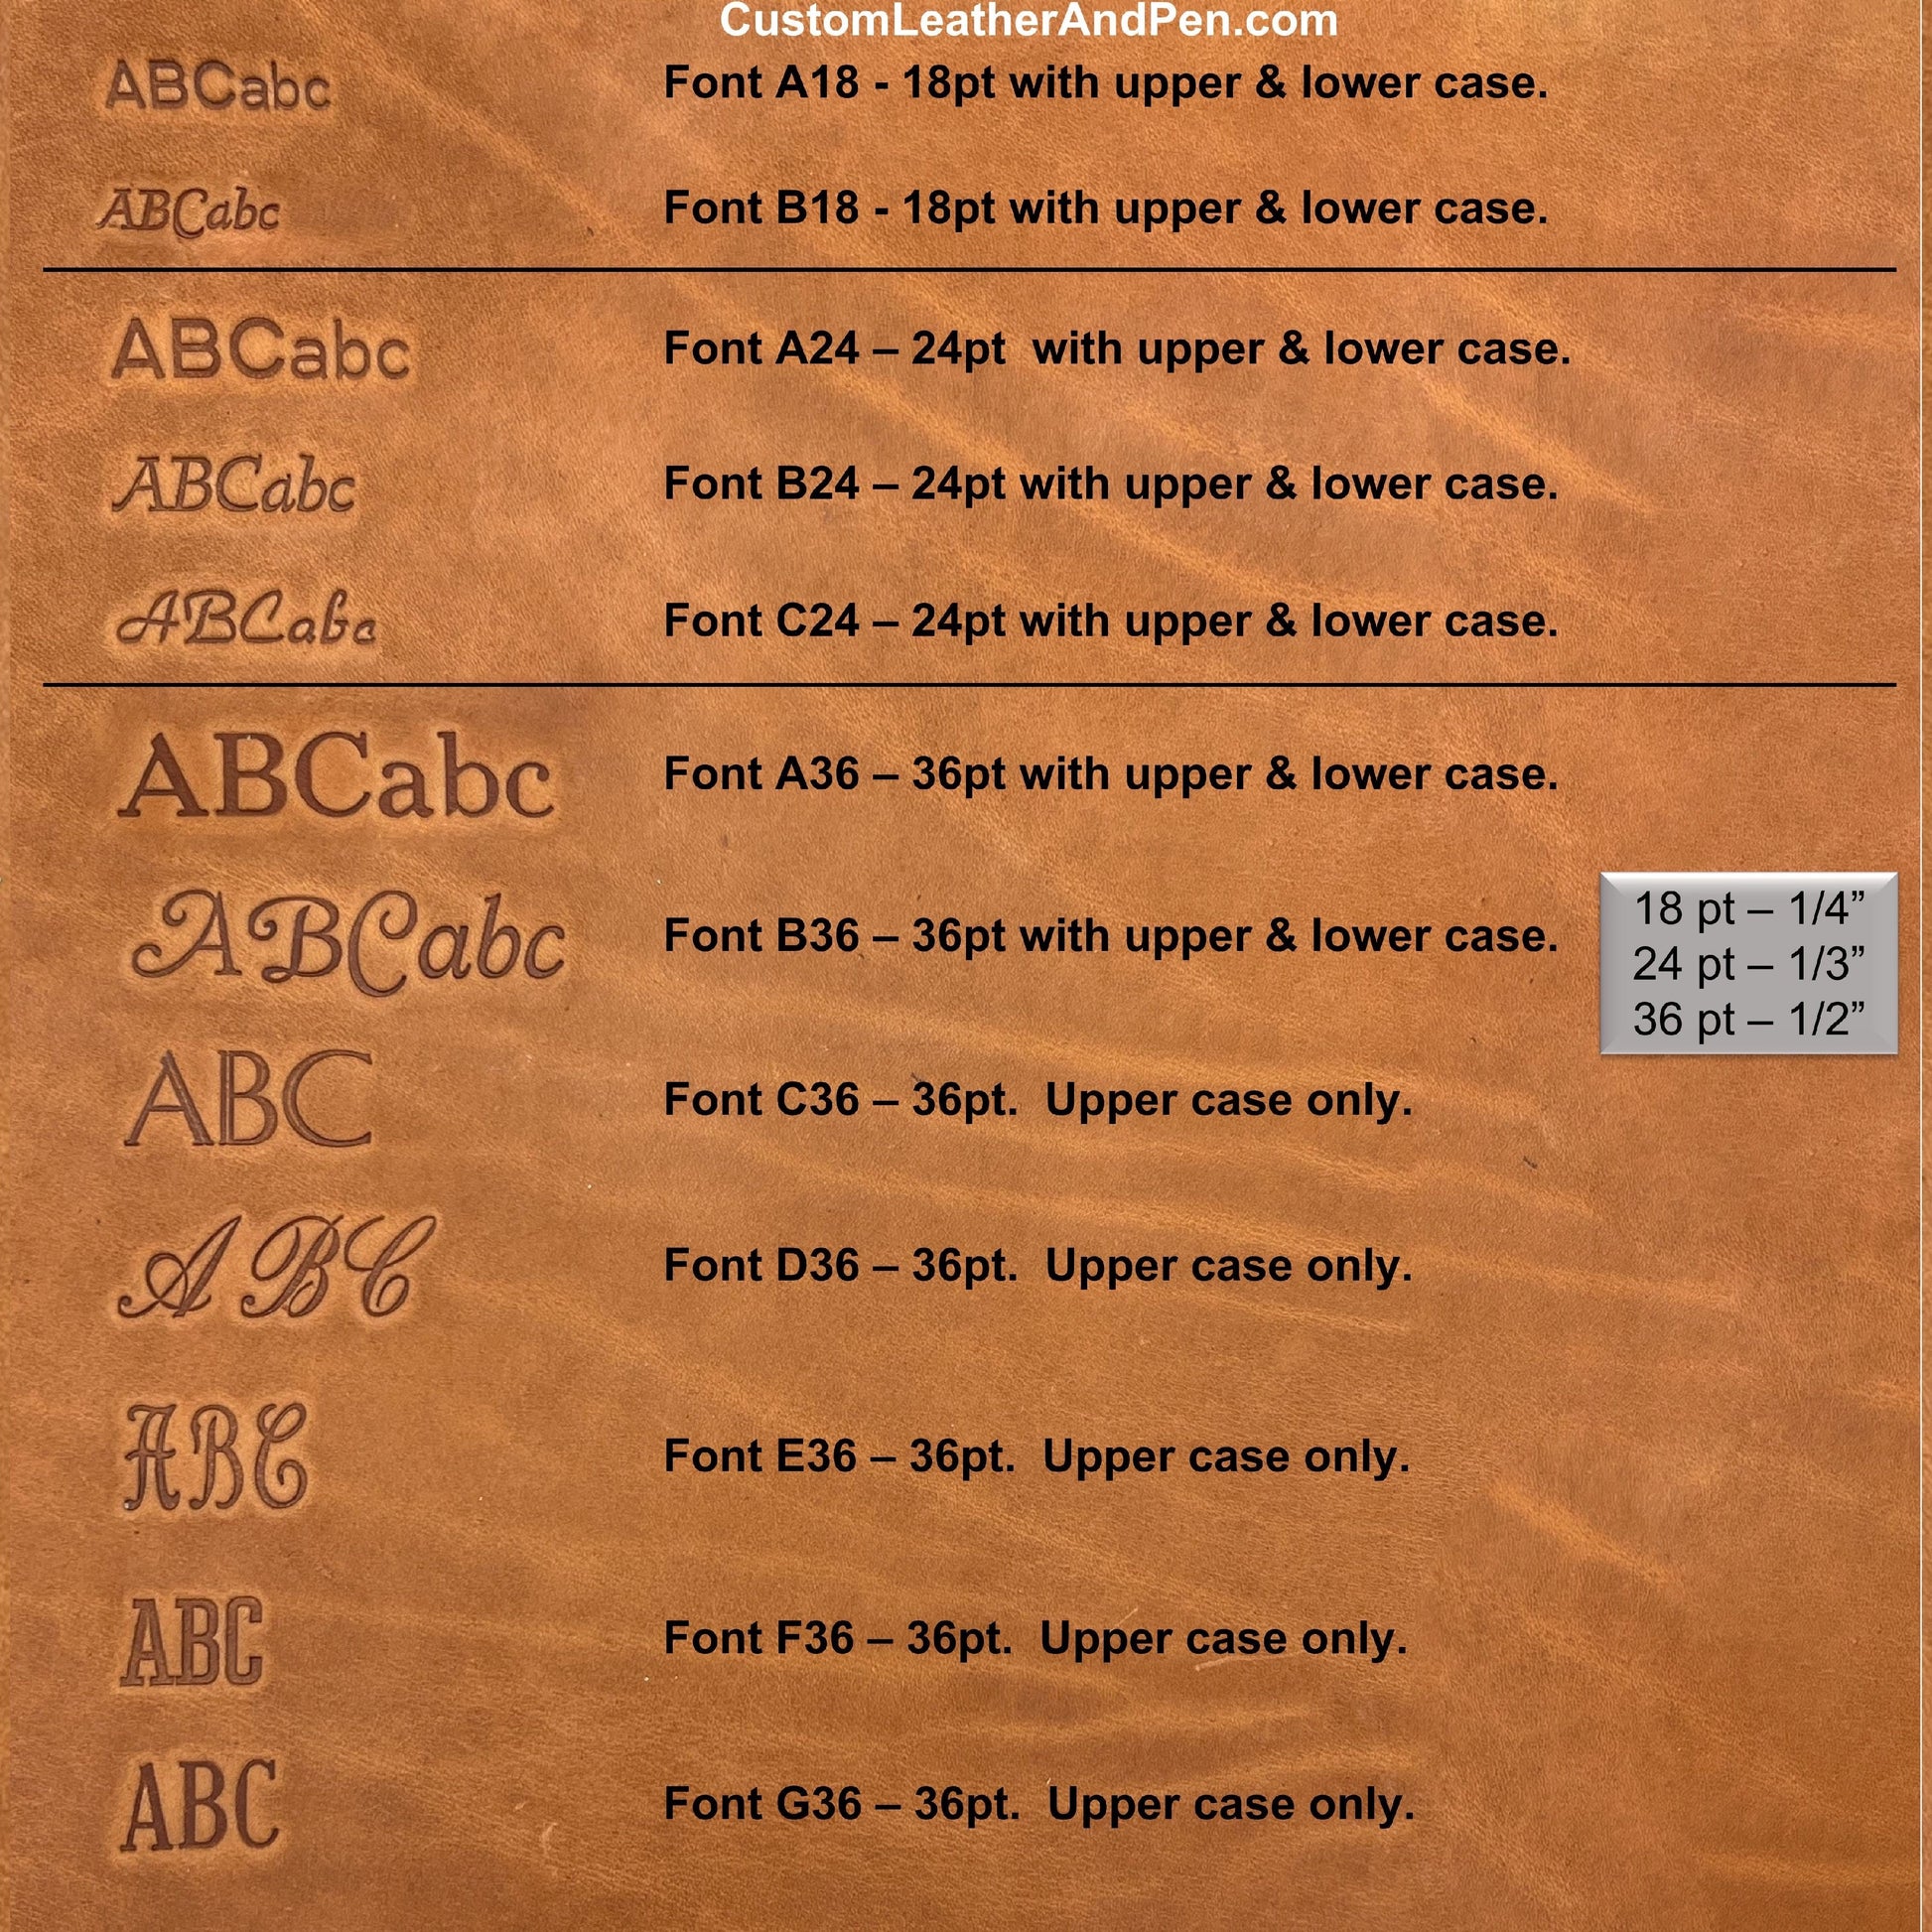 Heat Stamp Font Options for Custom Leather and Pen Leather Shop in Houston, TX